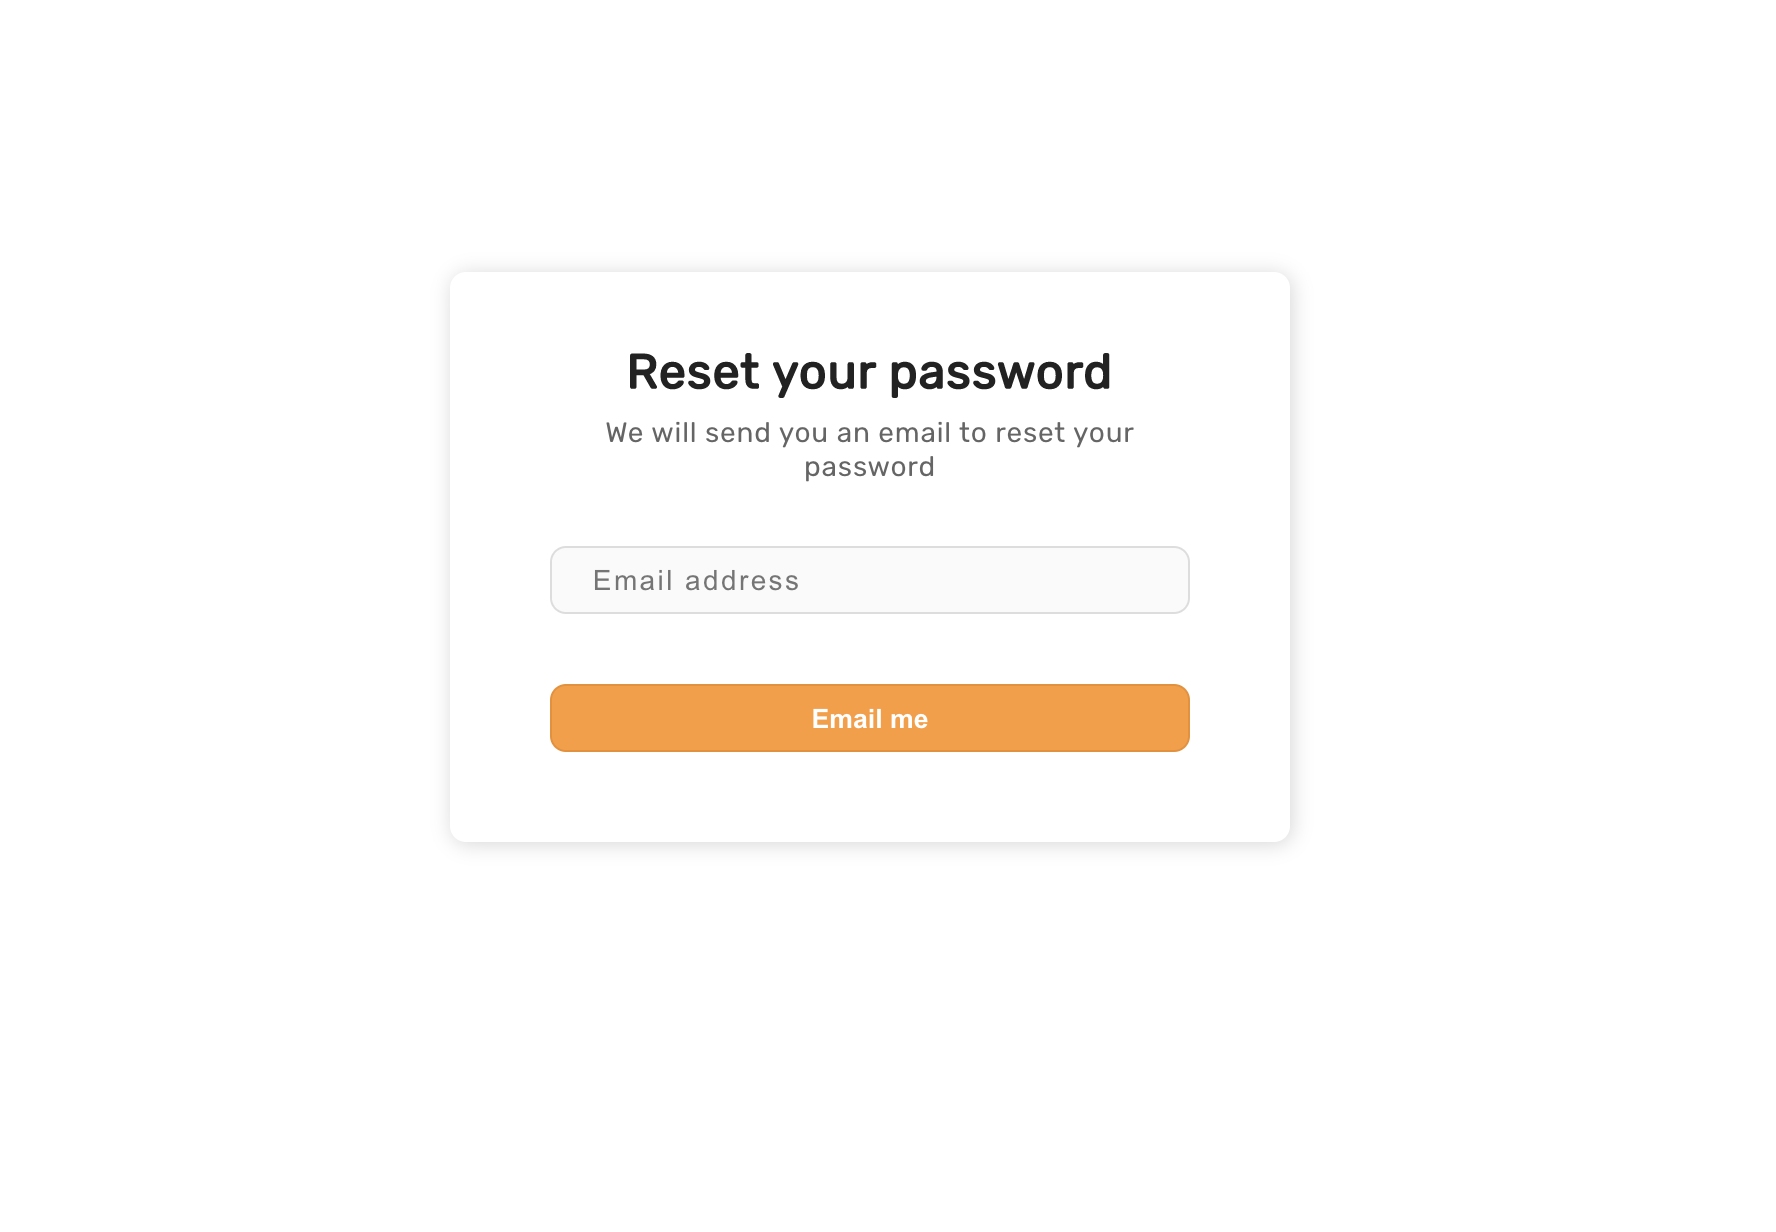 UI to send password reset email